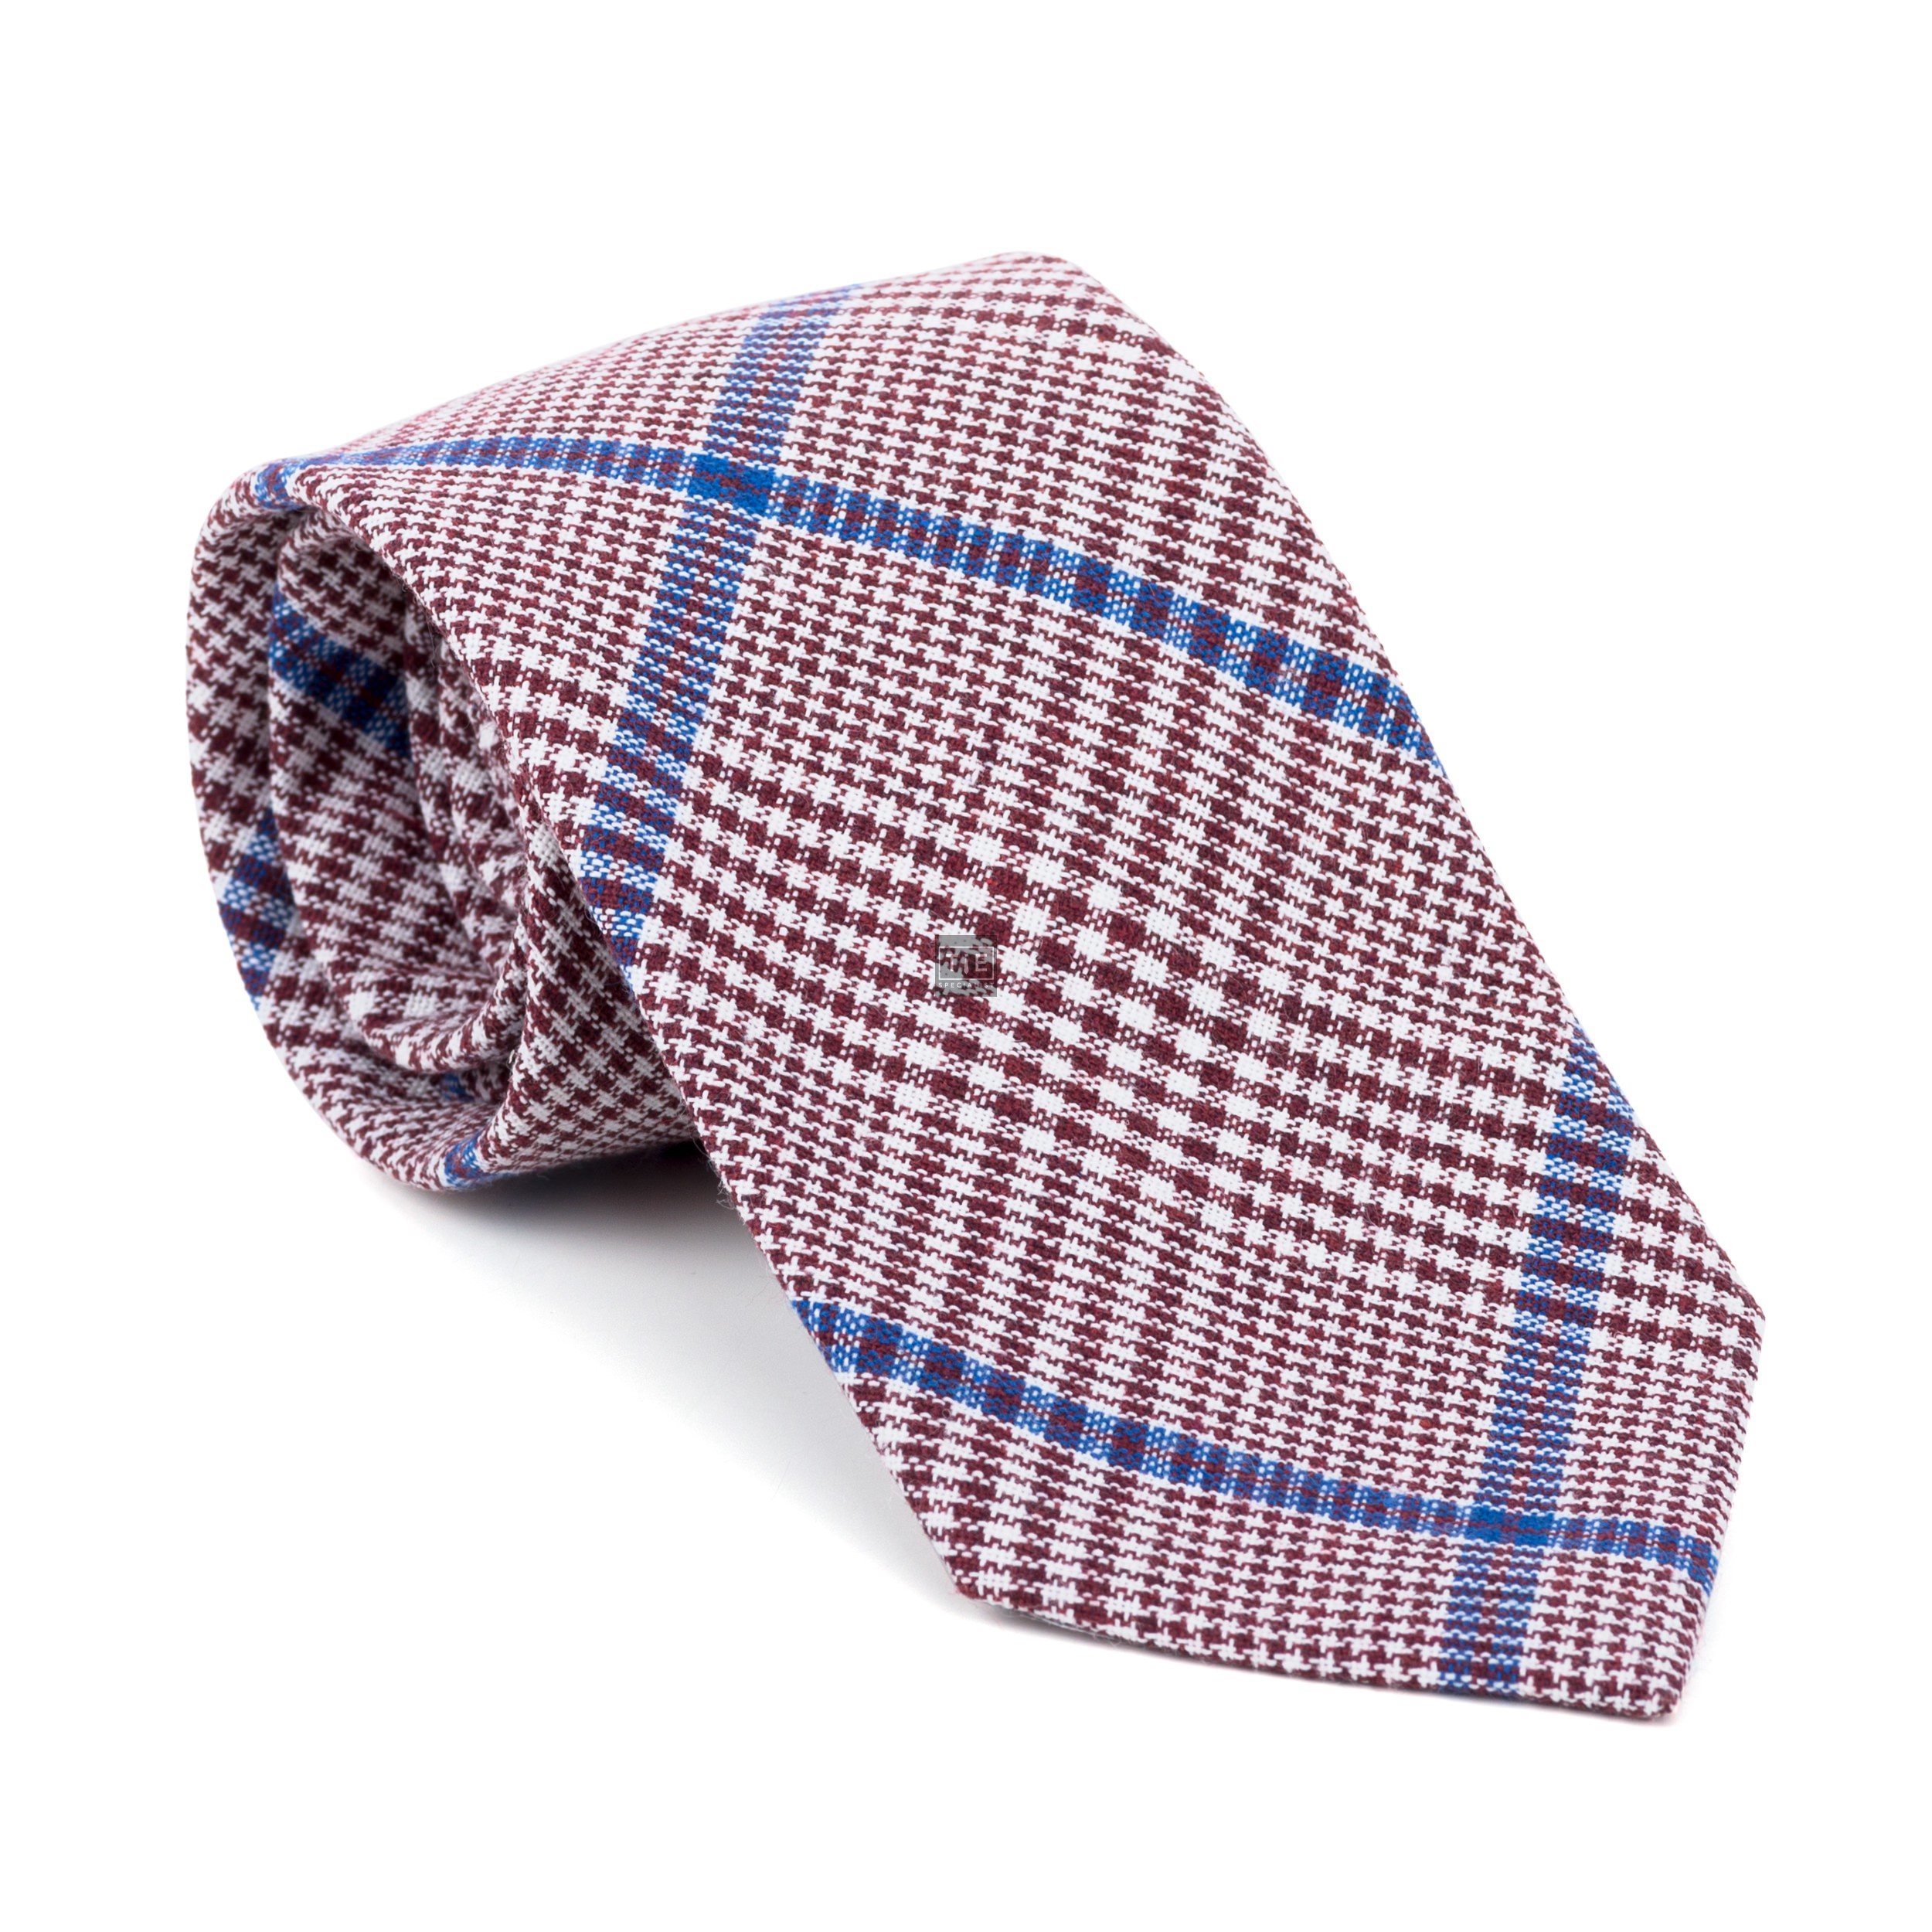 Burgundy Check Tie - Check Red Classic Width 8cm